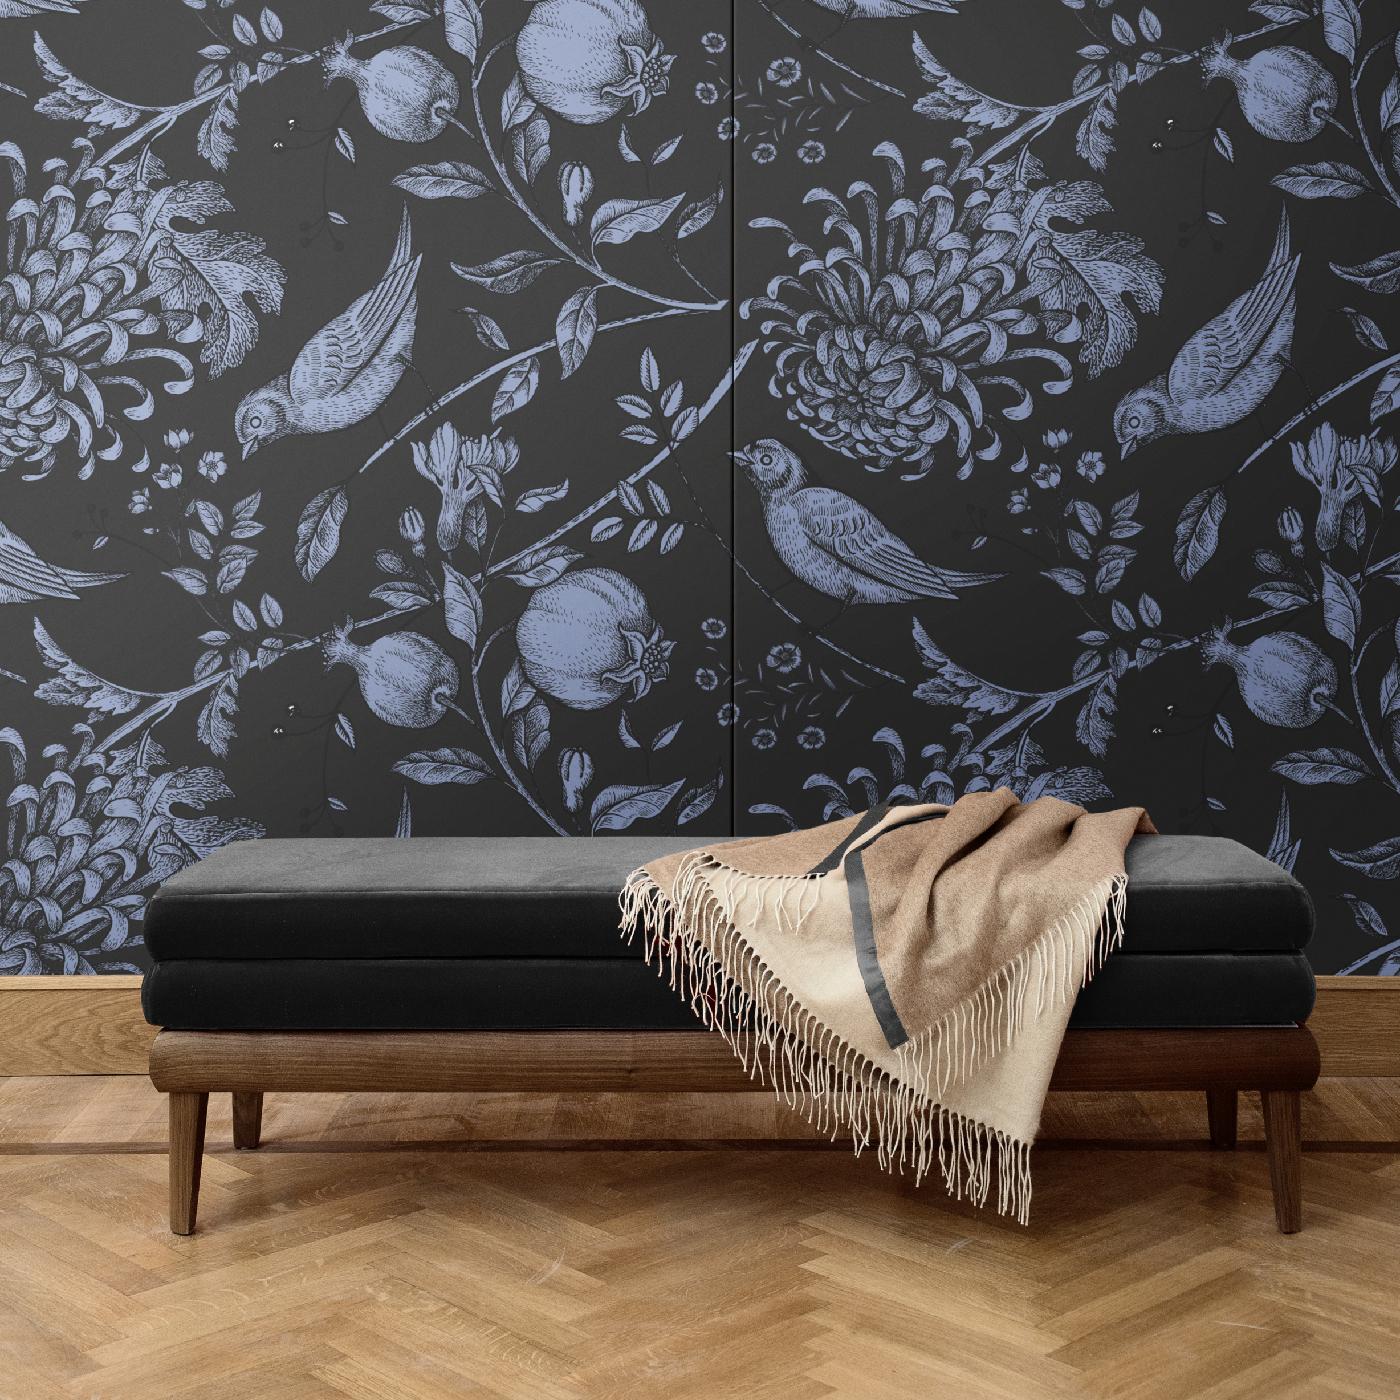 This superb wall covering will adorn a bedroom, a powder room, or entryway with a unique combination of luxury and dynamism. It is part of the Flowers and Birds collection and boasts a black background on which delicate dahlias, fruits, and birds